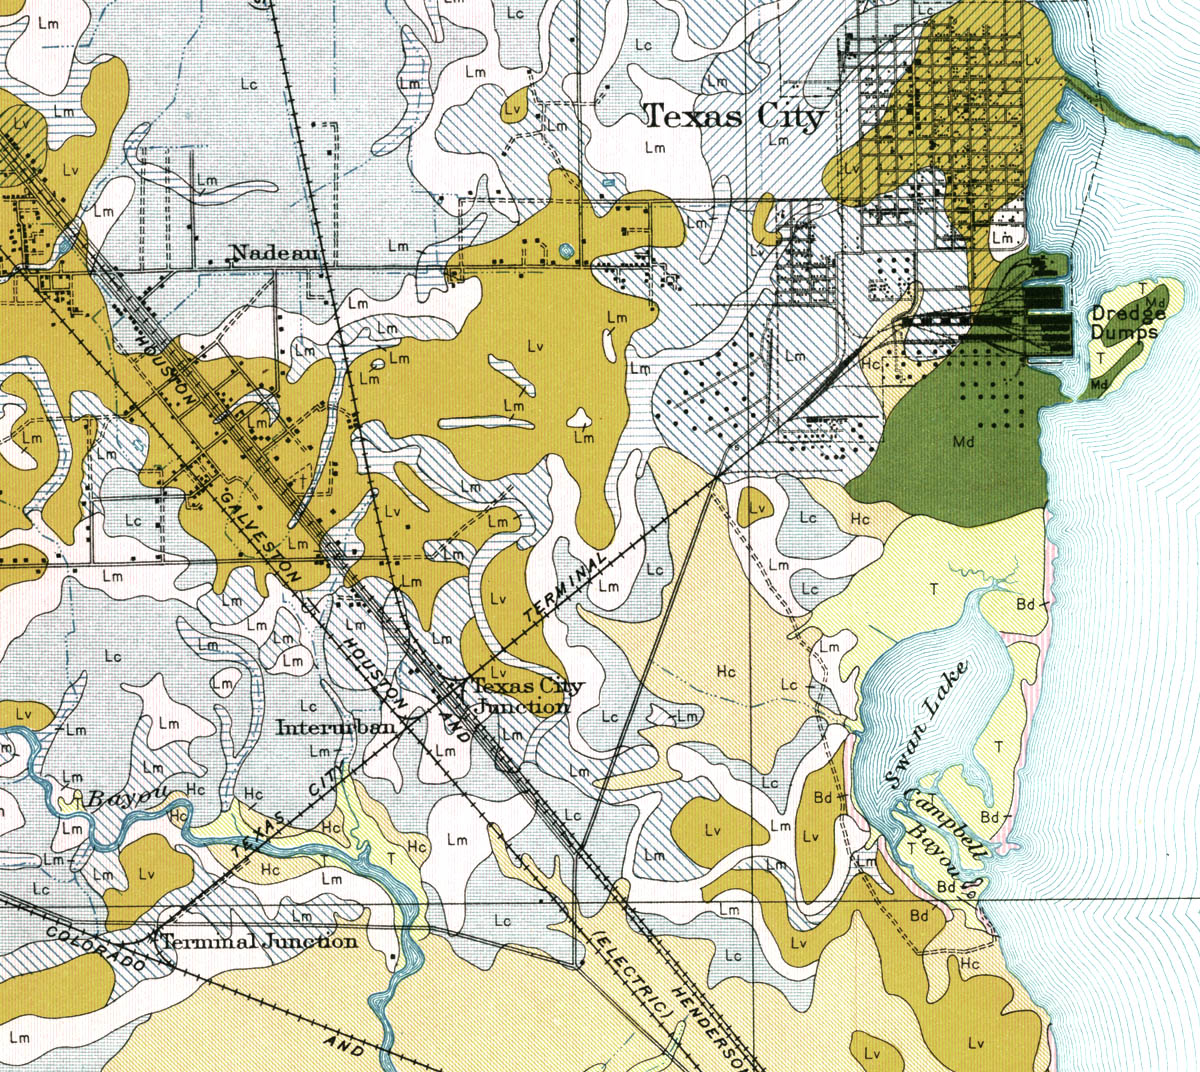 Texas City Terminal Railway Company (Tex.), Map Showing Route and Industrial Tracks in 1935.